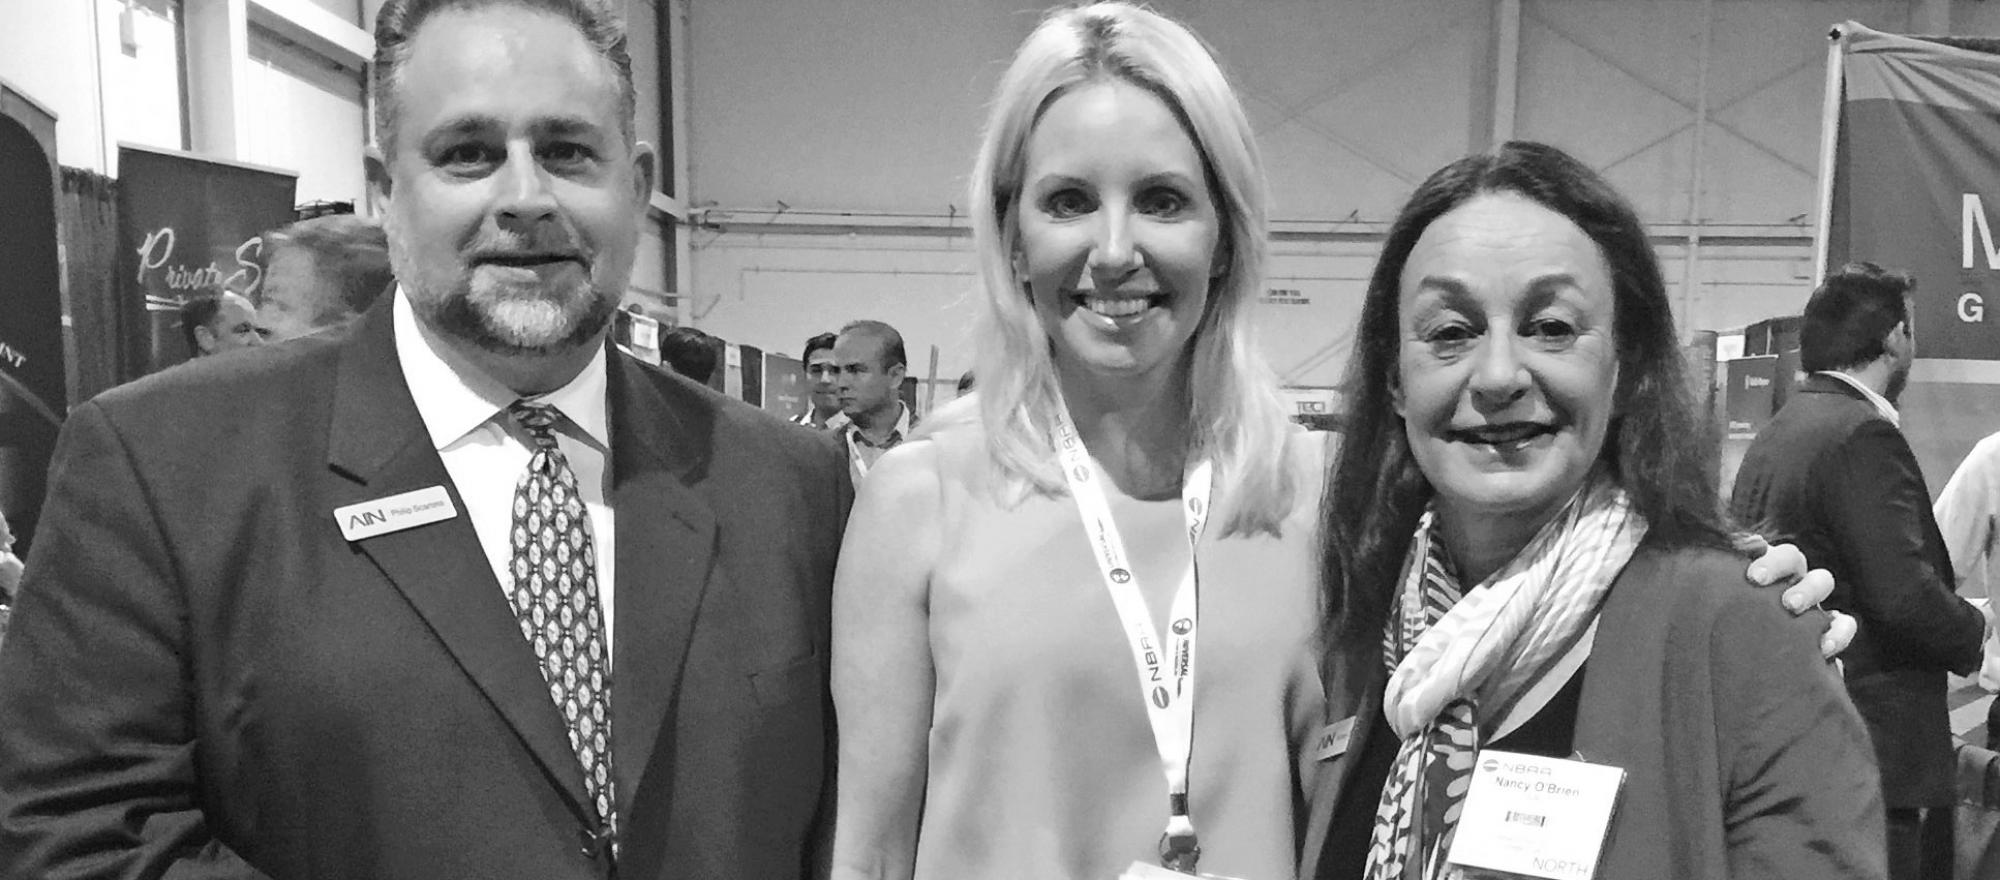 Jennifer Leach English (center) with BJT’s onsite logistics manager Philip Scarano and associate publisher Nancy O’Brien at the NBAA Regional Forum in West Palm Beach. 